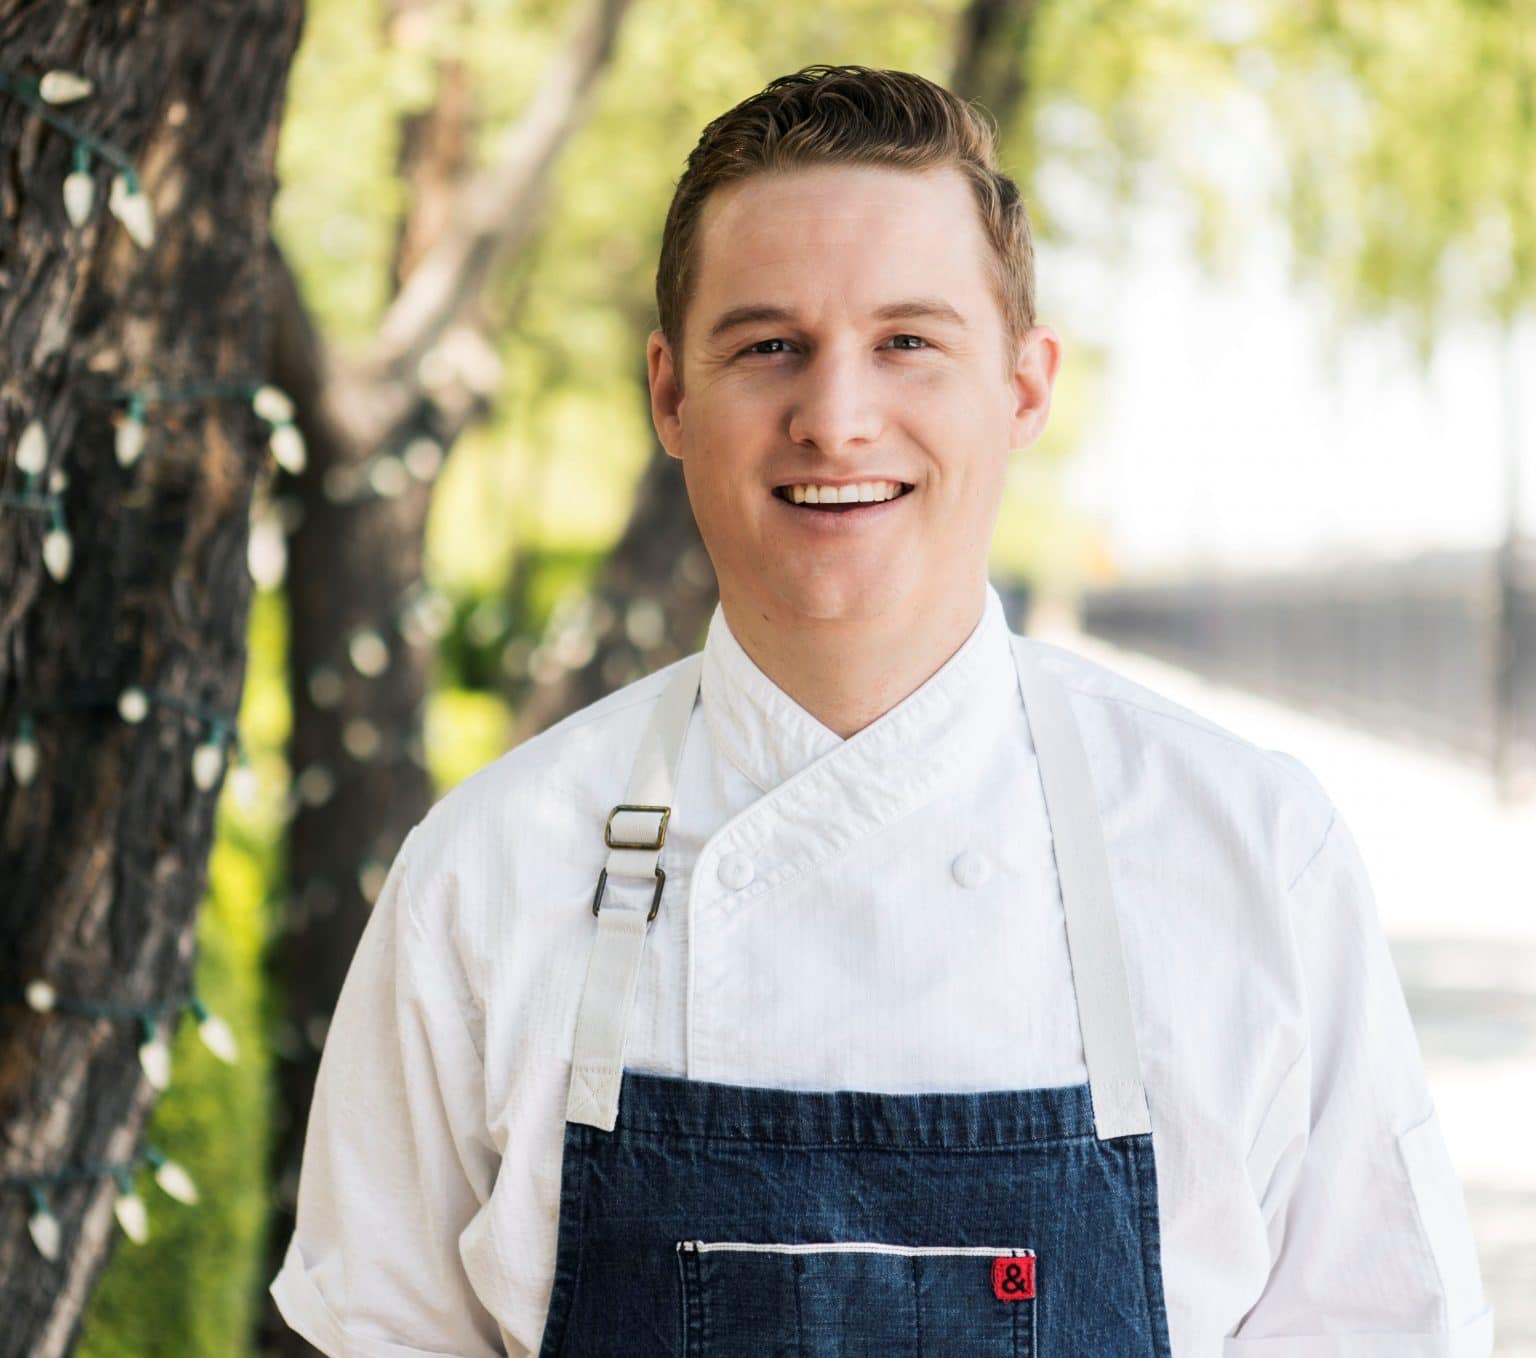 Santa Monica Seafood names Chef Brian their Chef of the Month!